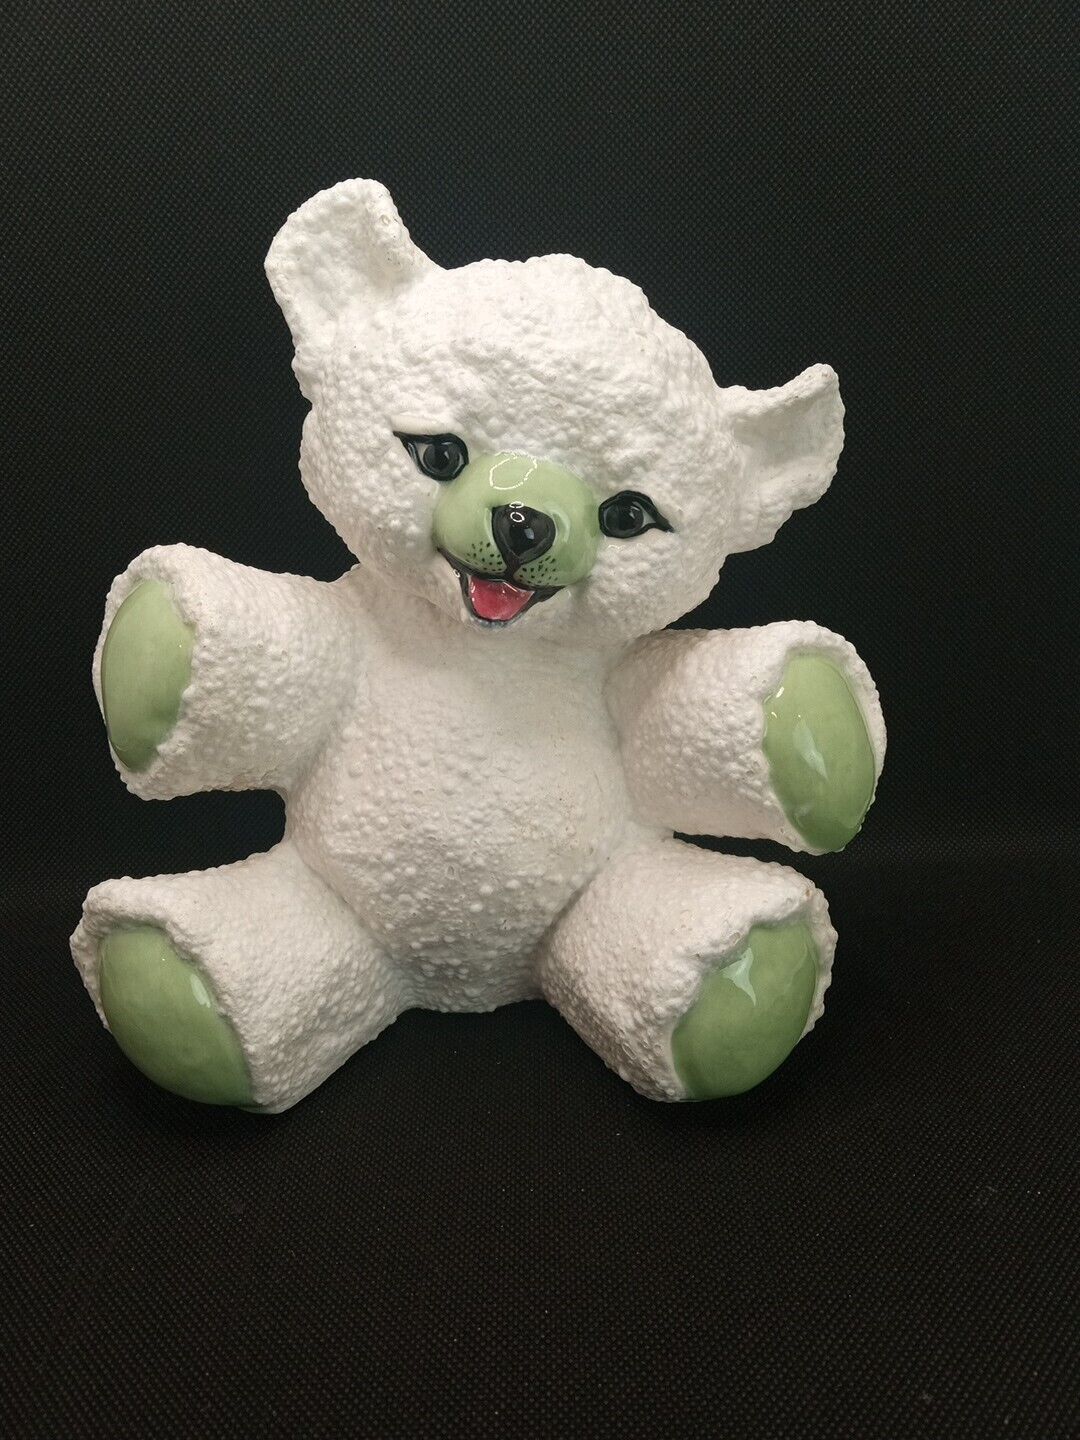 Vintage Textured Ceramic RW Teddy Bear White And Green 8.5 In Tall